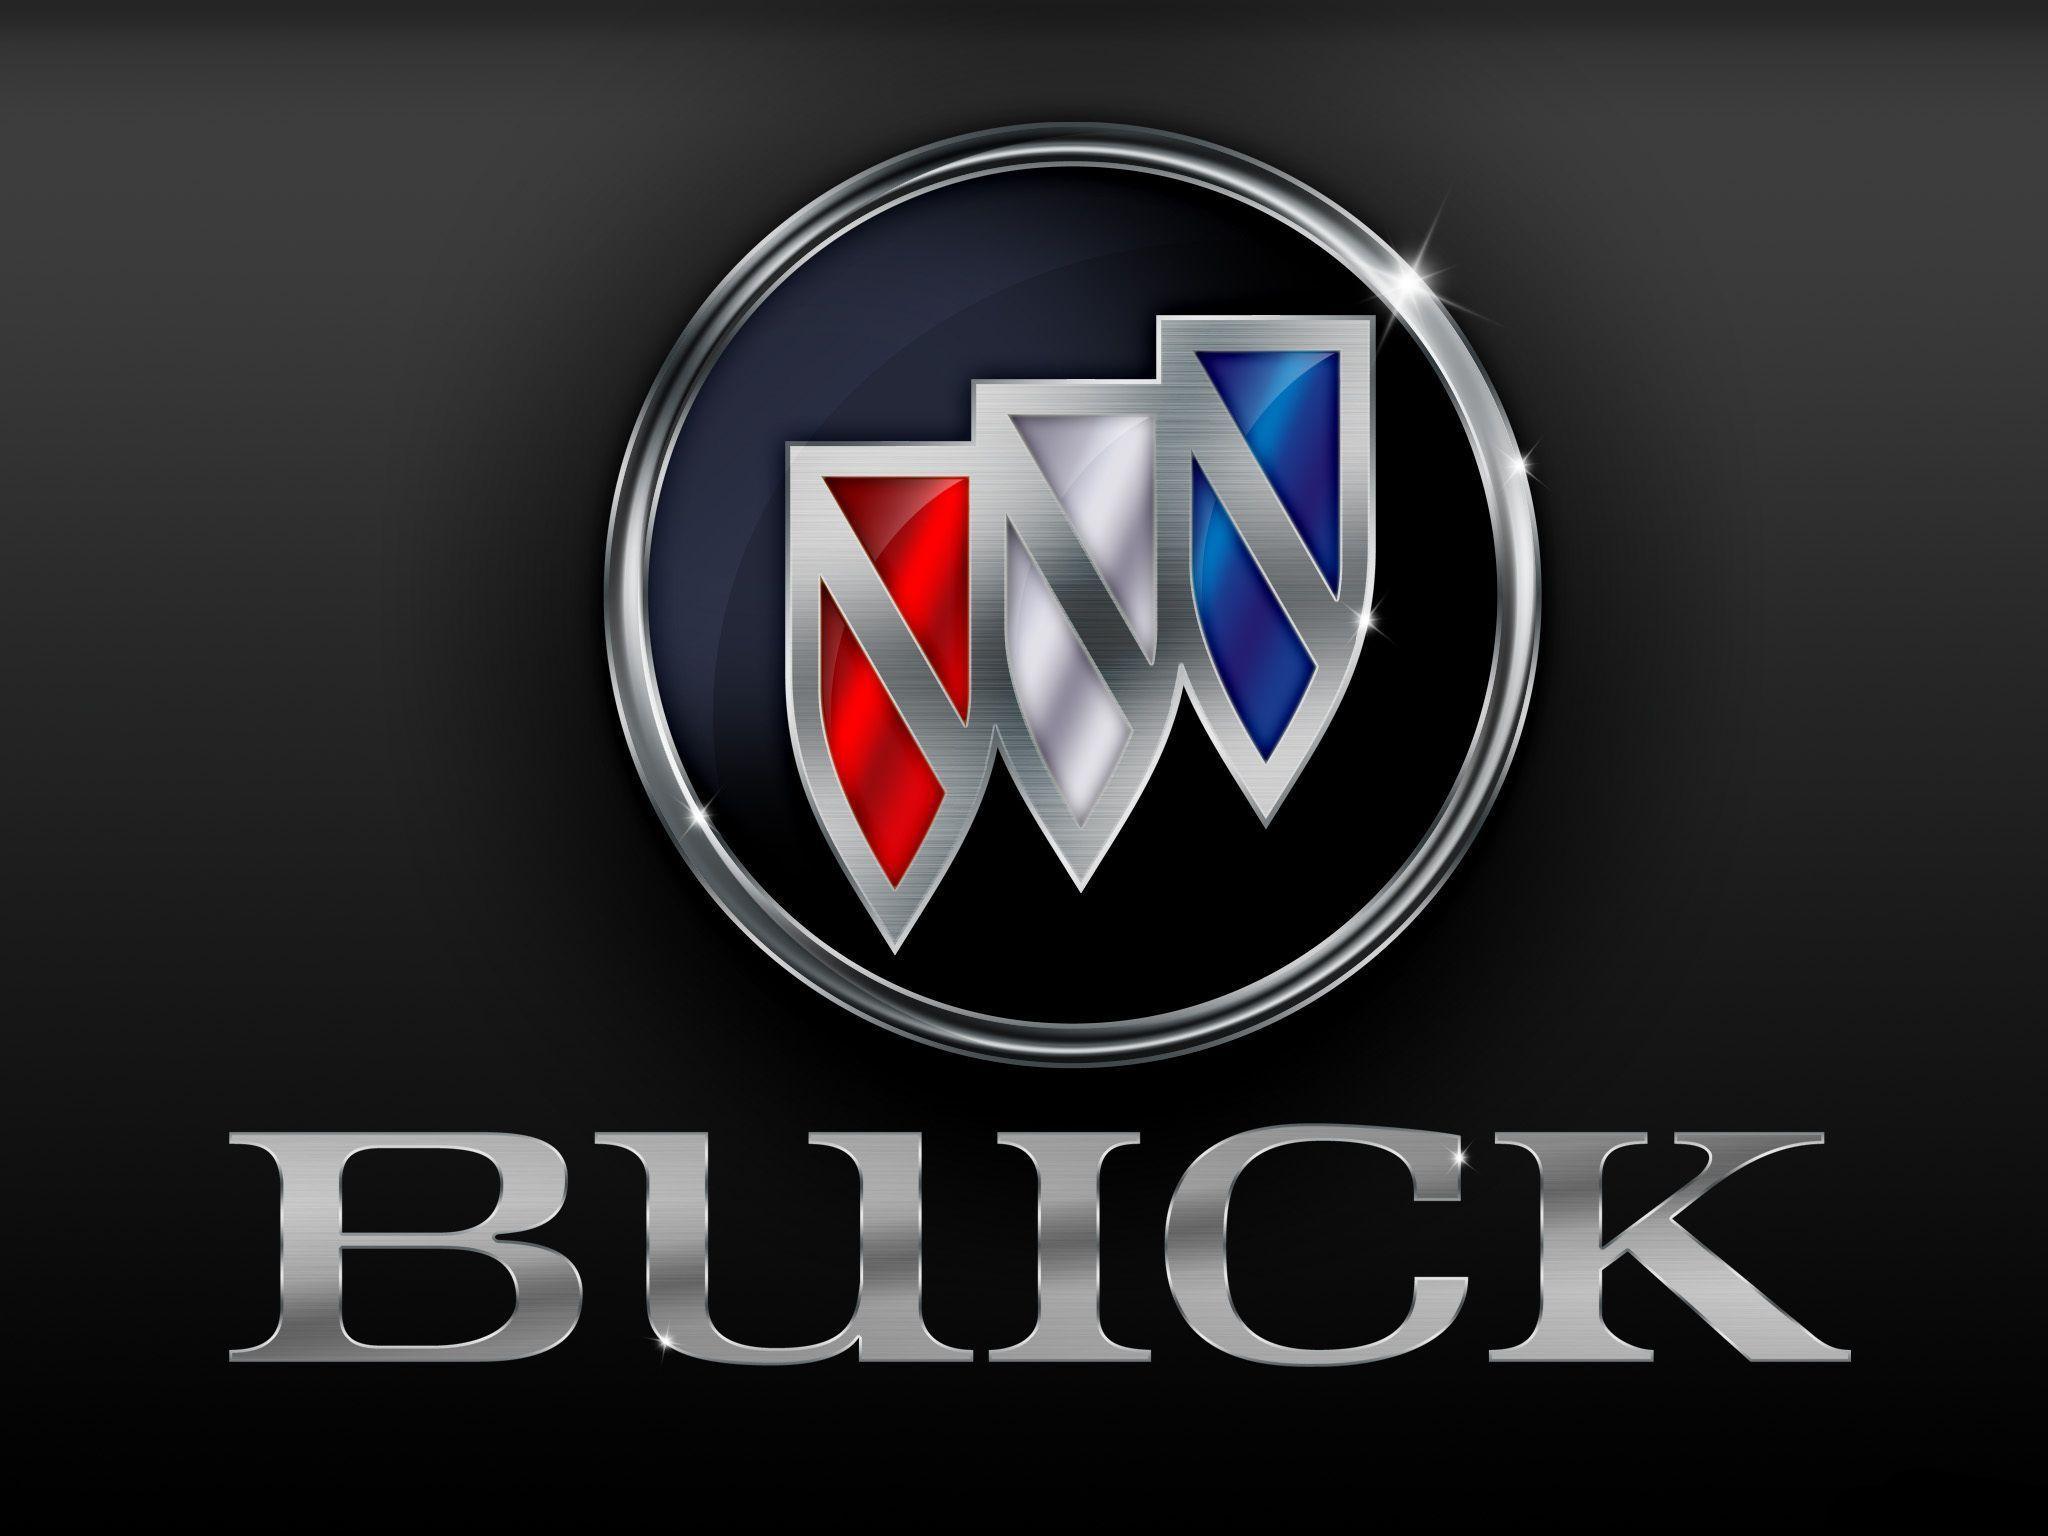 1970s Buick Logo - Buick Logo, Buick Car Symbol Meaning and History | Car Brand Names.com